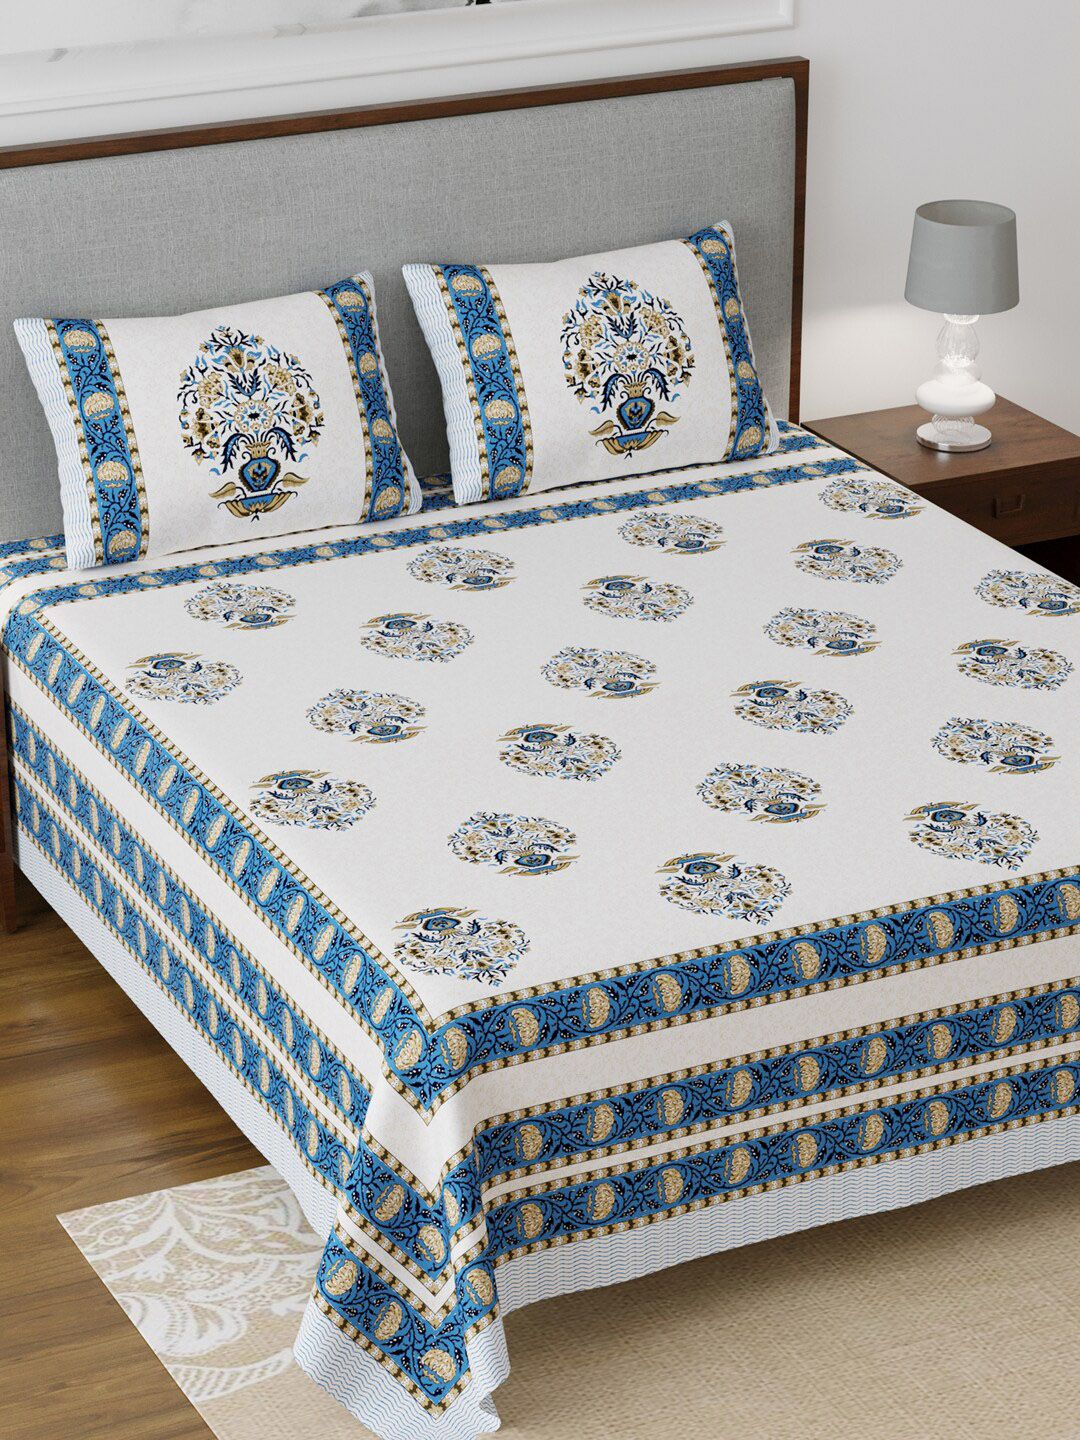 Salona Bichona White & Blue Ethnic Motifs 120 TC Cotton 1 King Bedsheet with 2 Pillow Covers Price in India